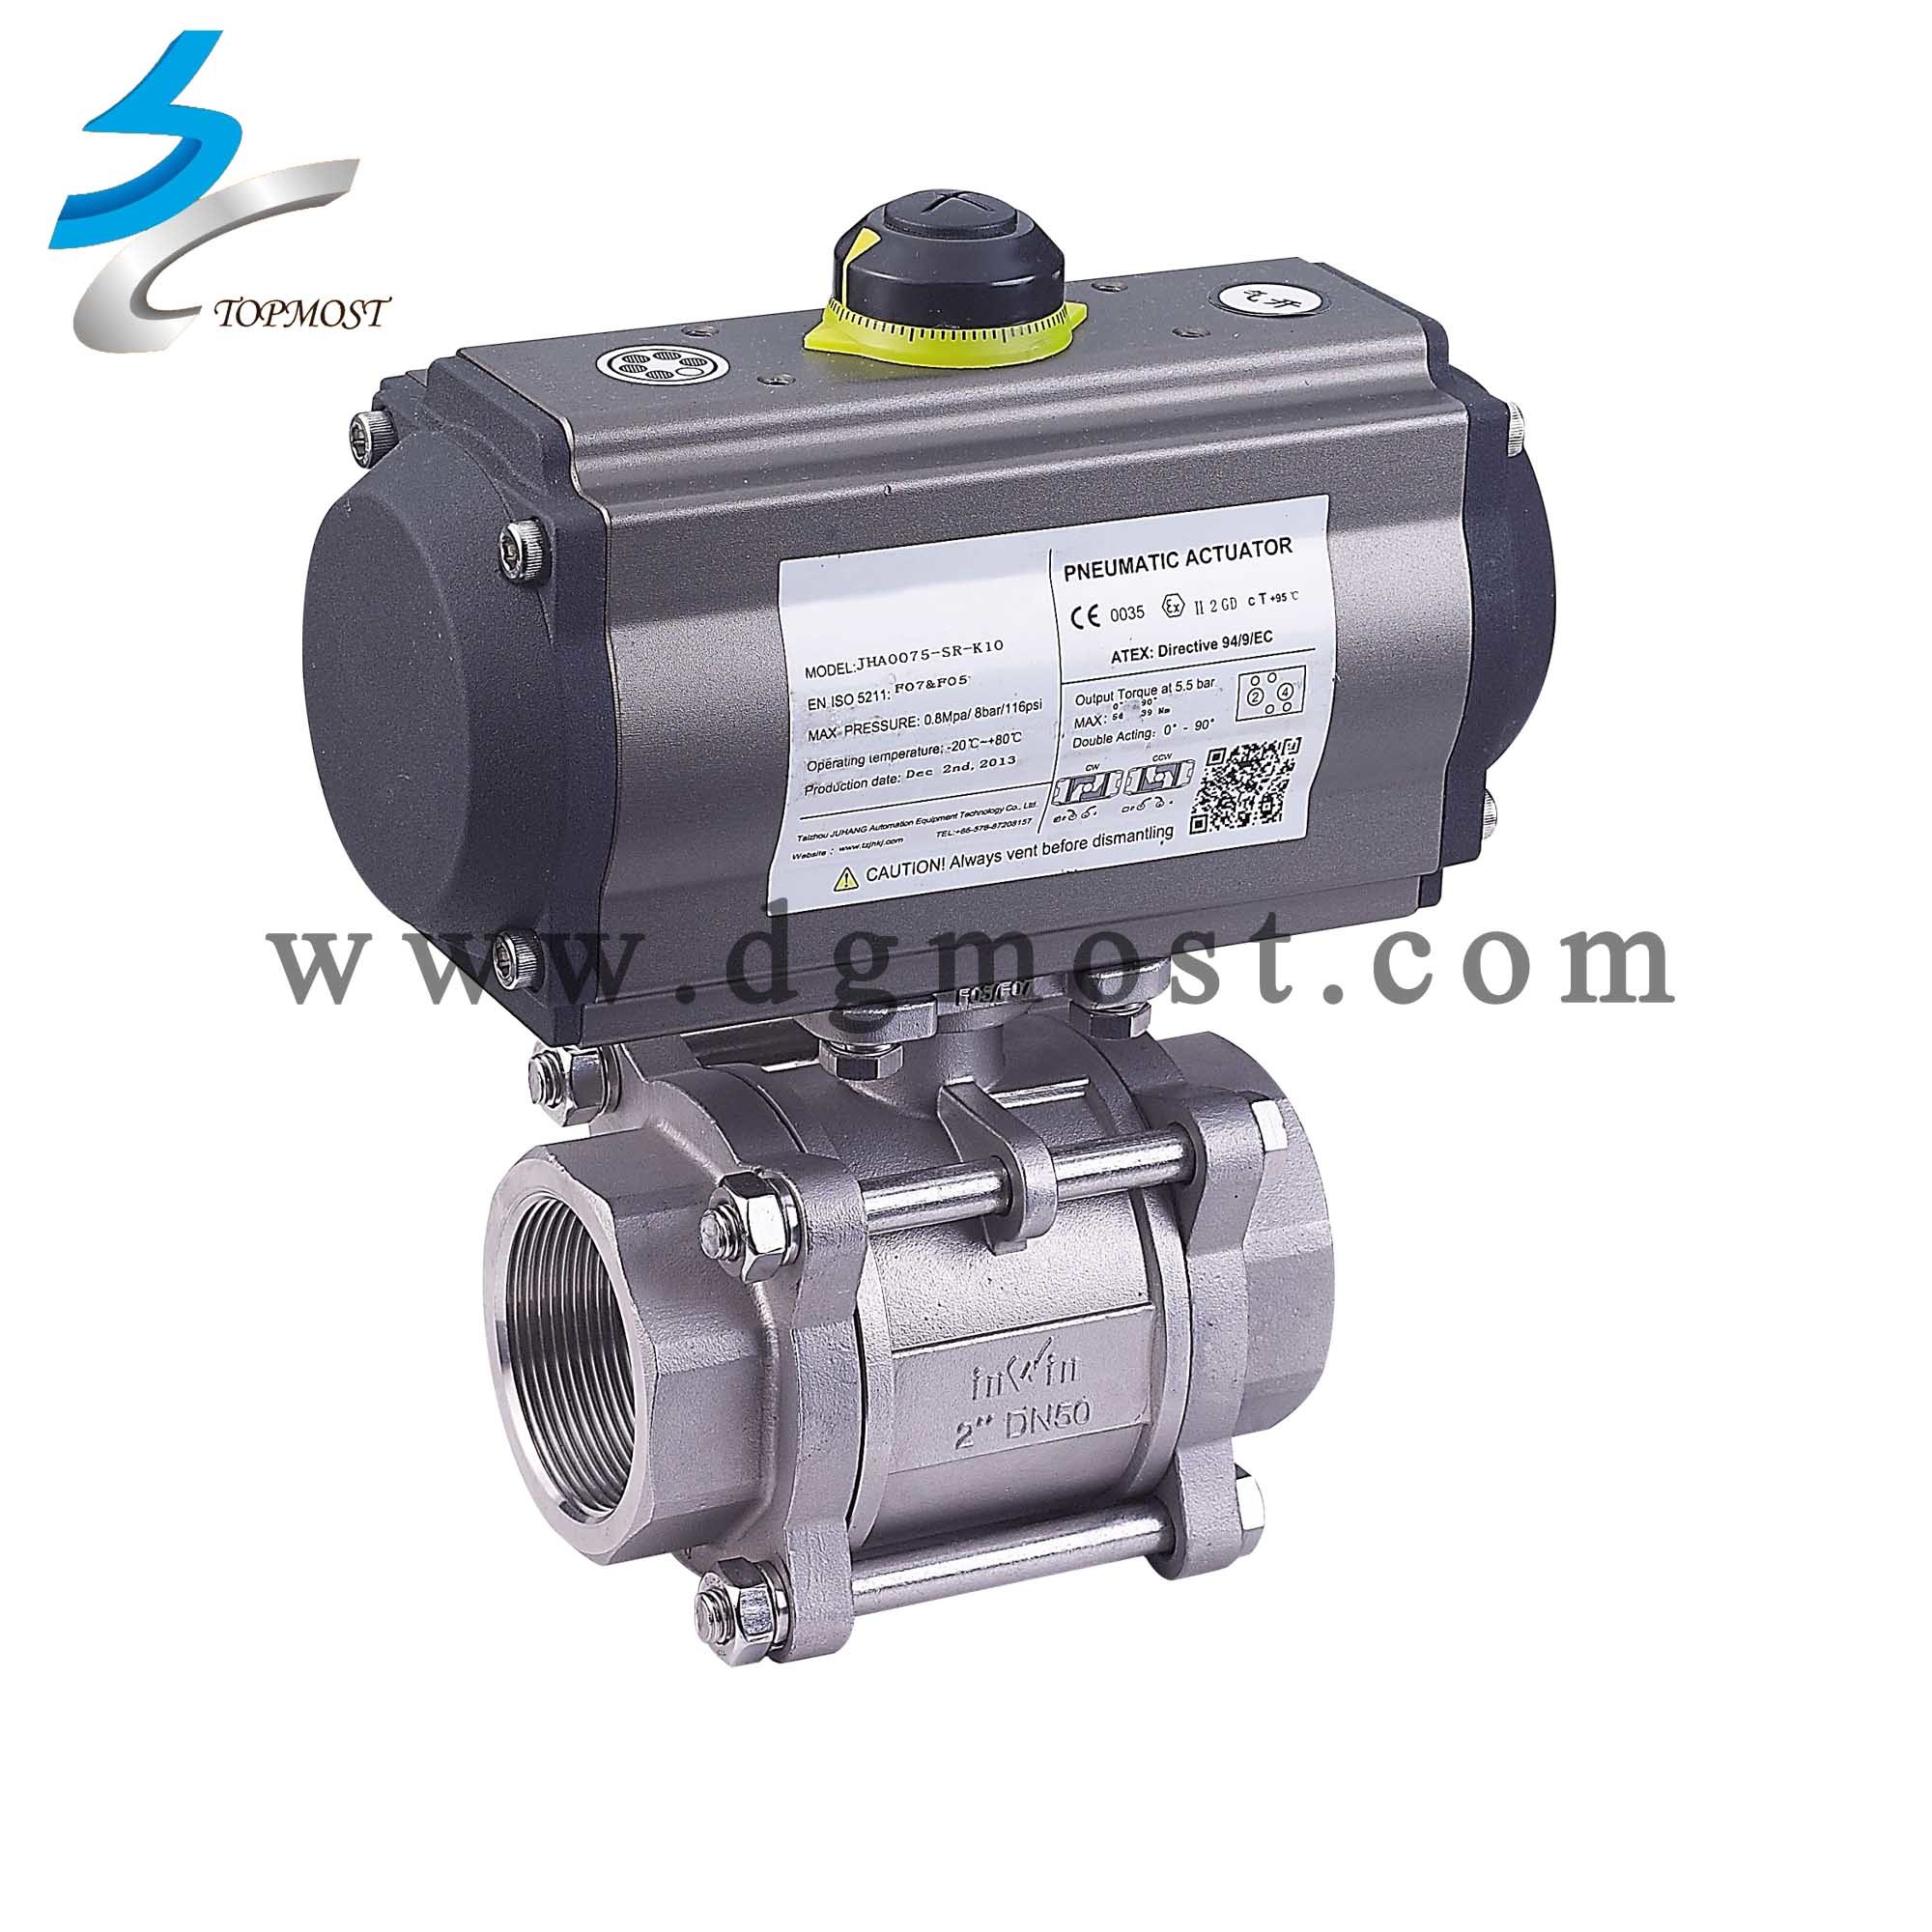 Custom-Tailored High Performance Stainless Steel Pneumatic Control Valve